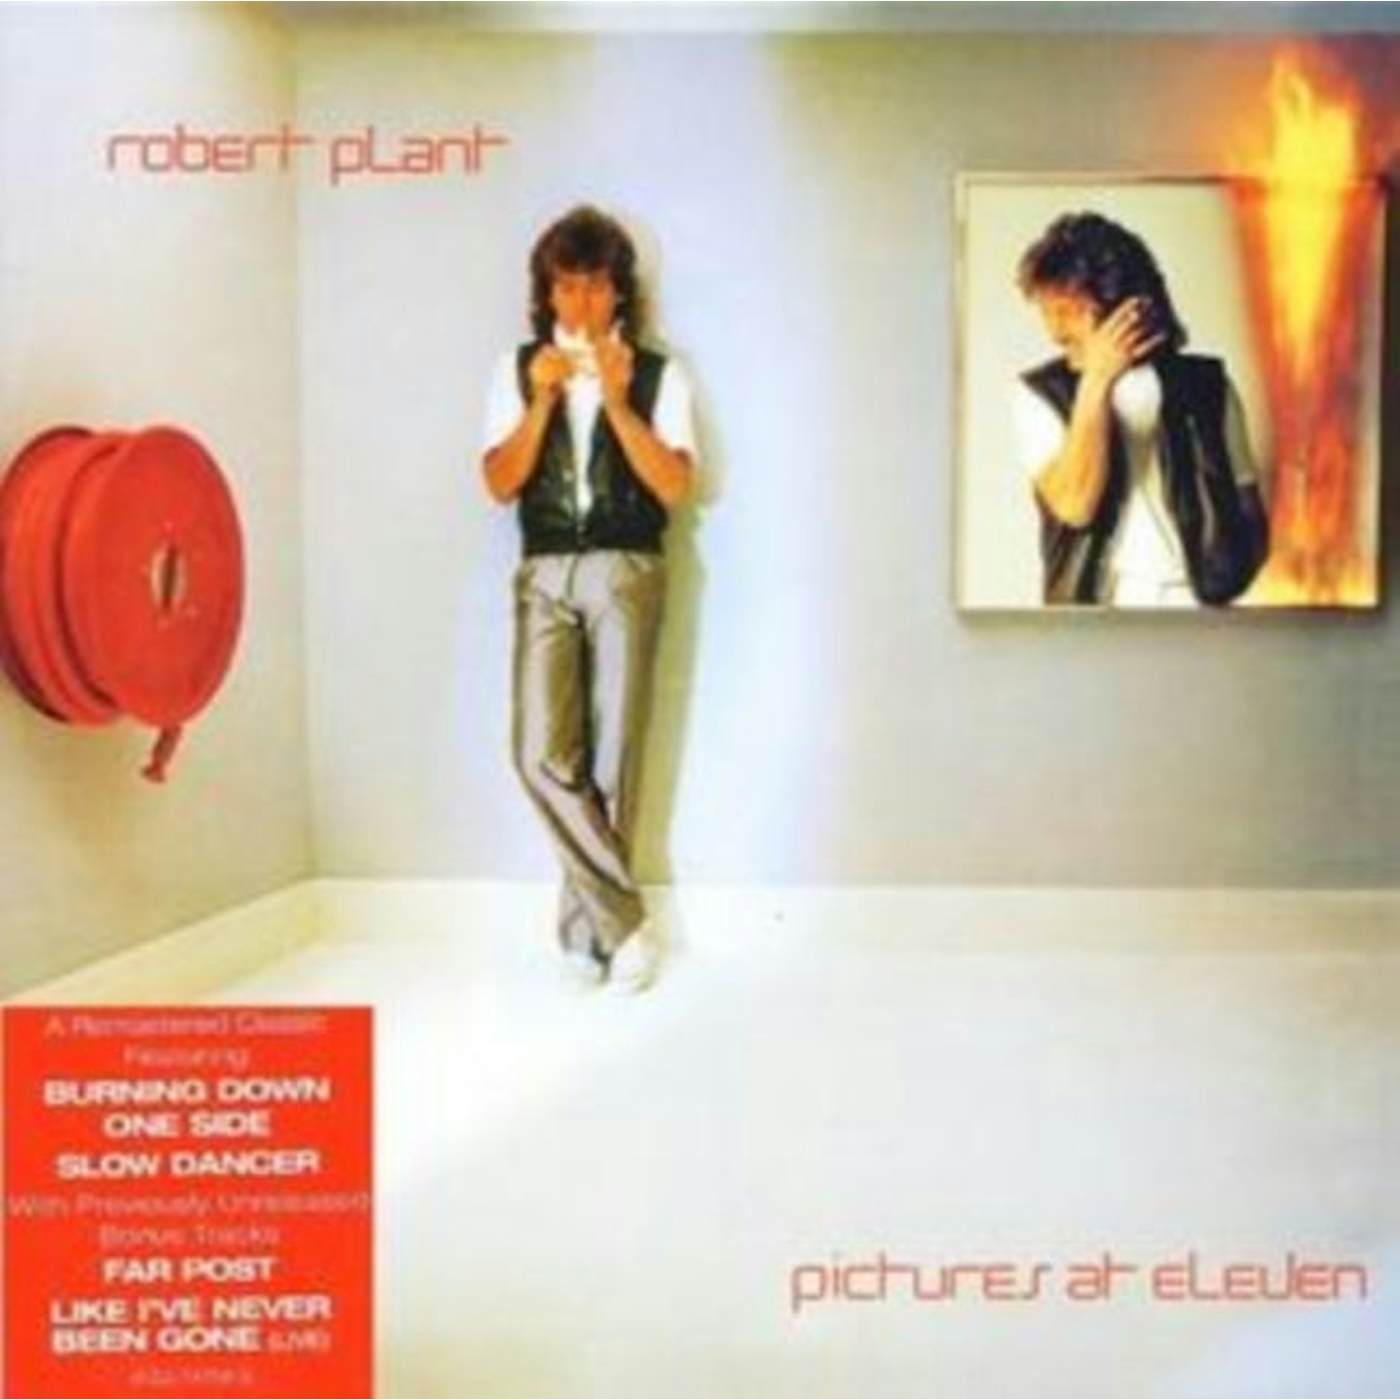 Robert Plant CD - Pictures At Eleven